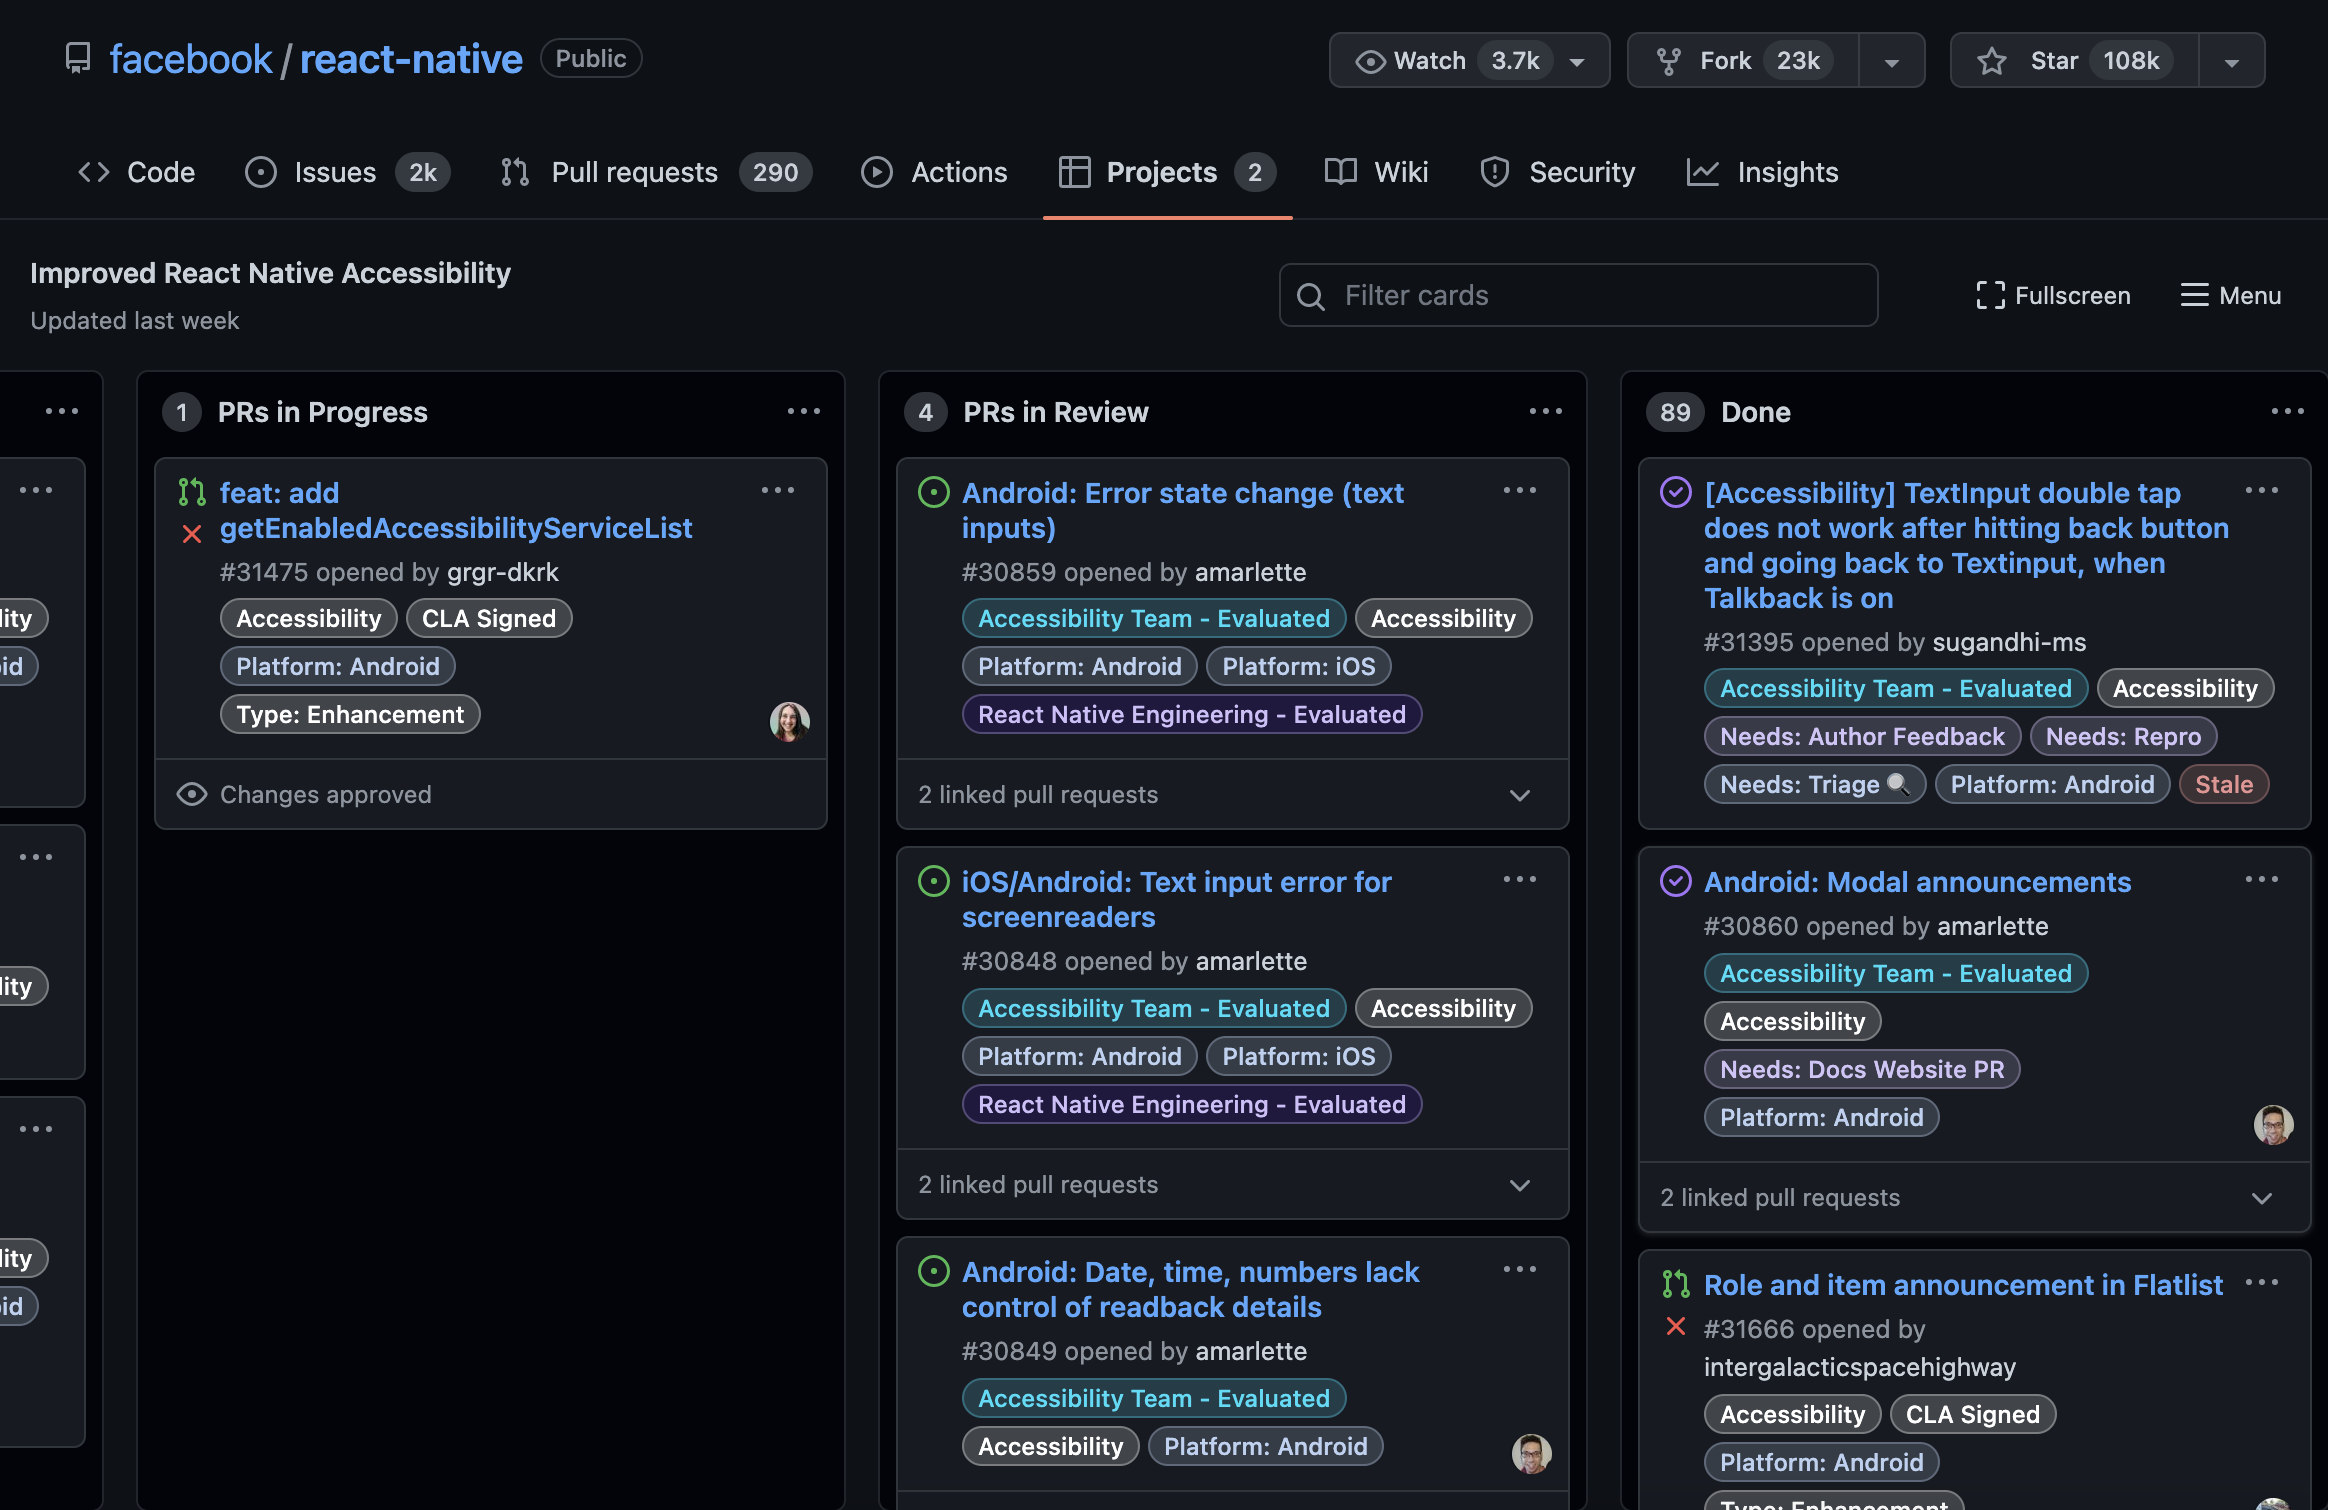 Screenshot of React Native github page for the 'Improved React Native Accessibility' project board, showing tasks in PRs in Progress, PRs in Review, and Done columns